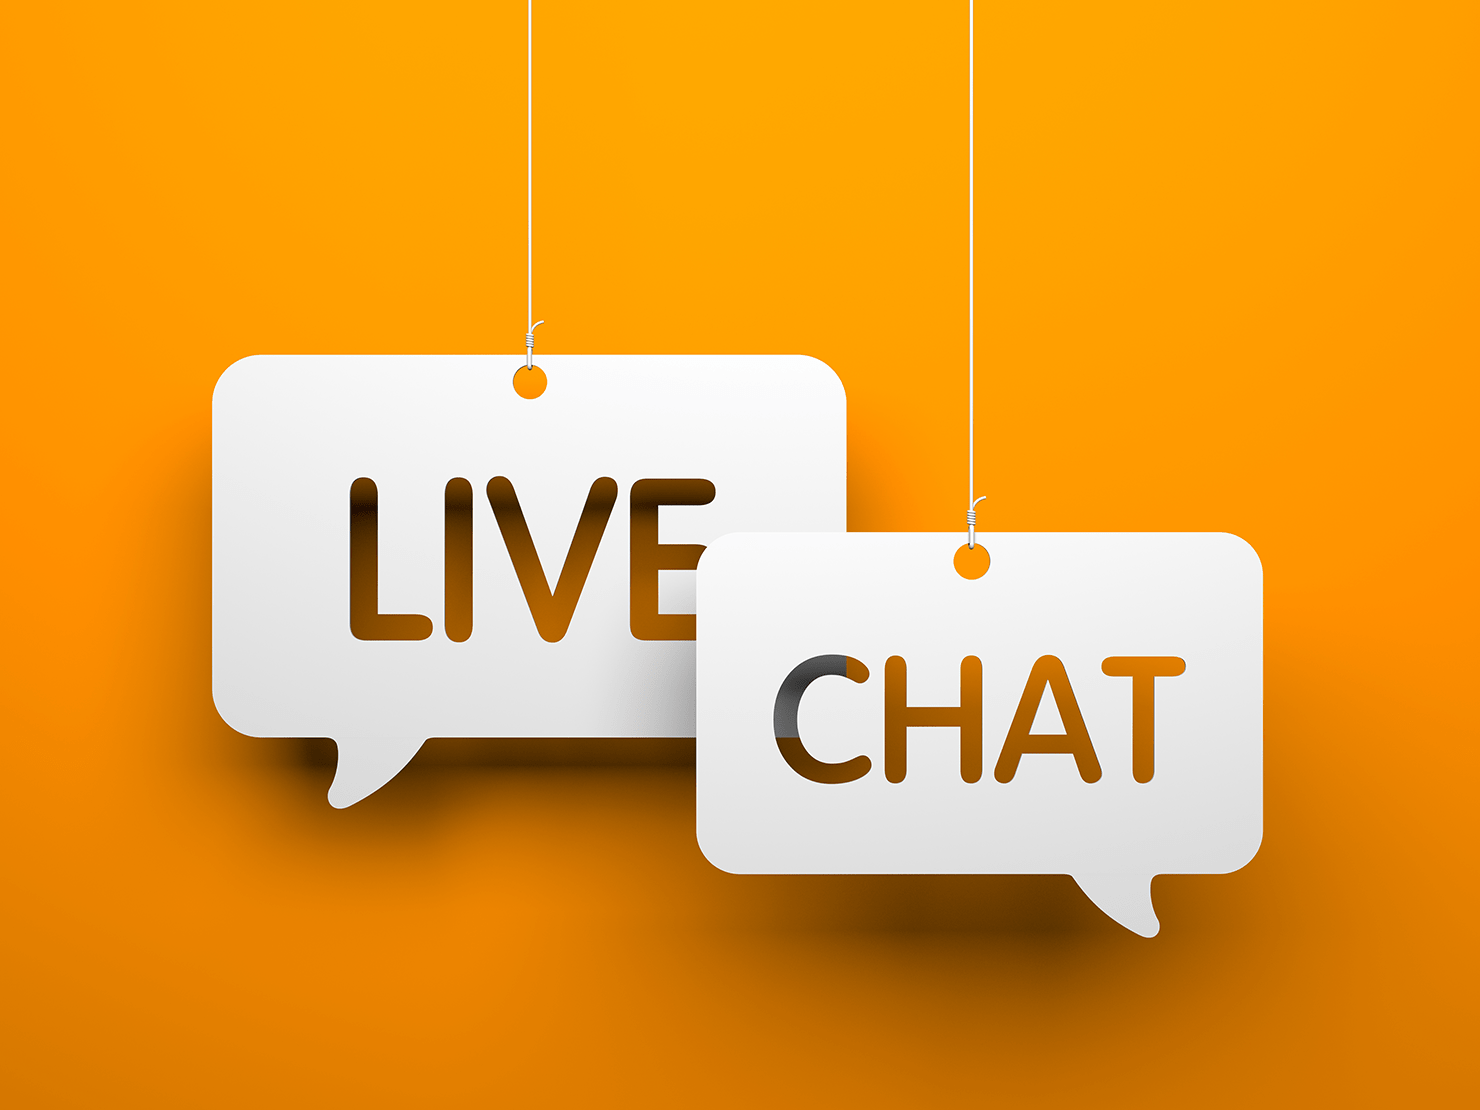 Live what chat is What is